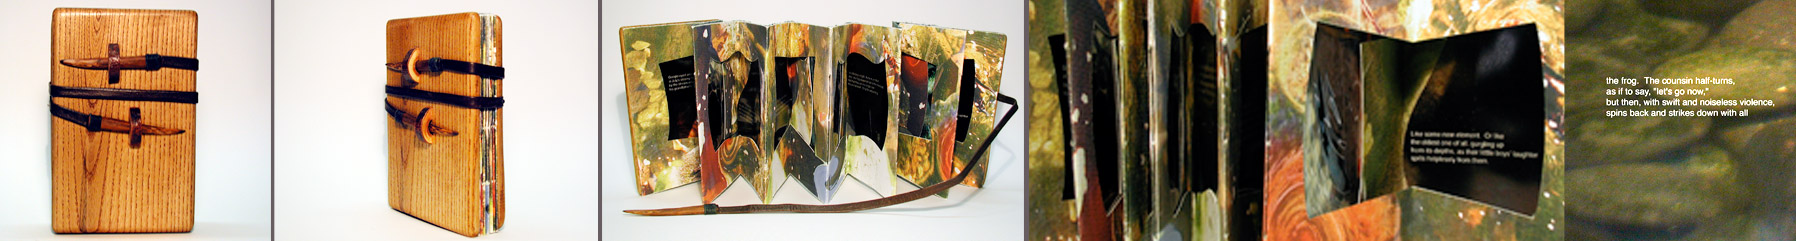 laughter mountain tea studios asheville nc artists books kristy higby